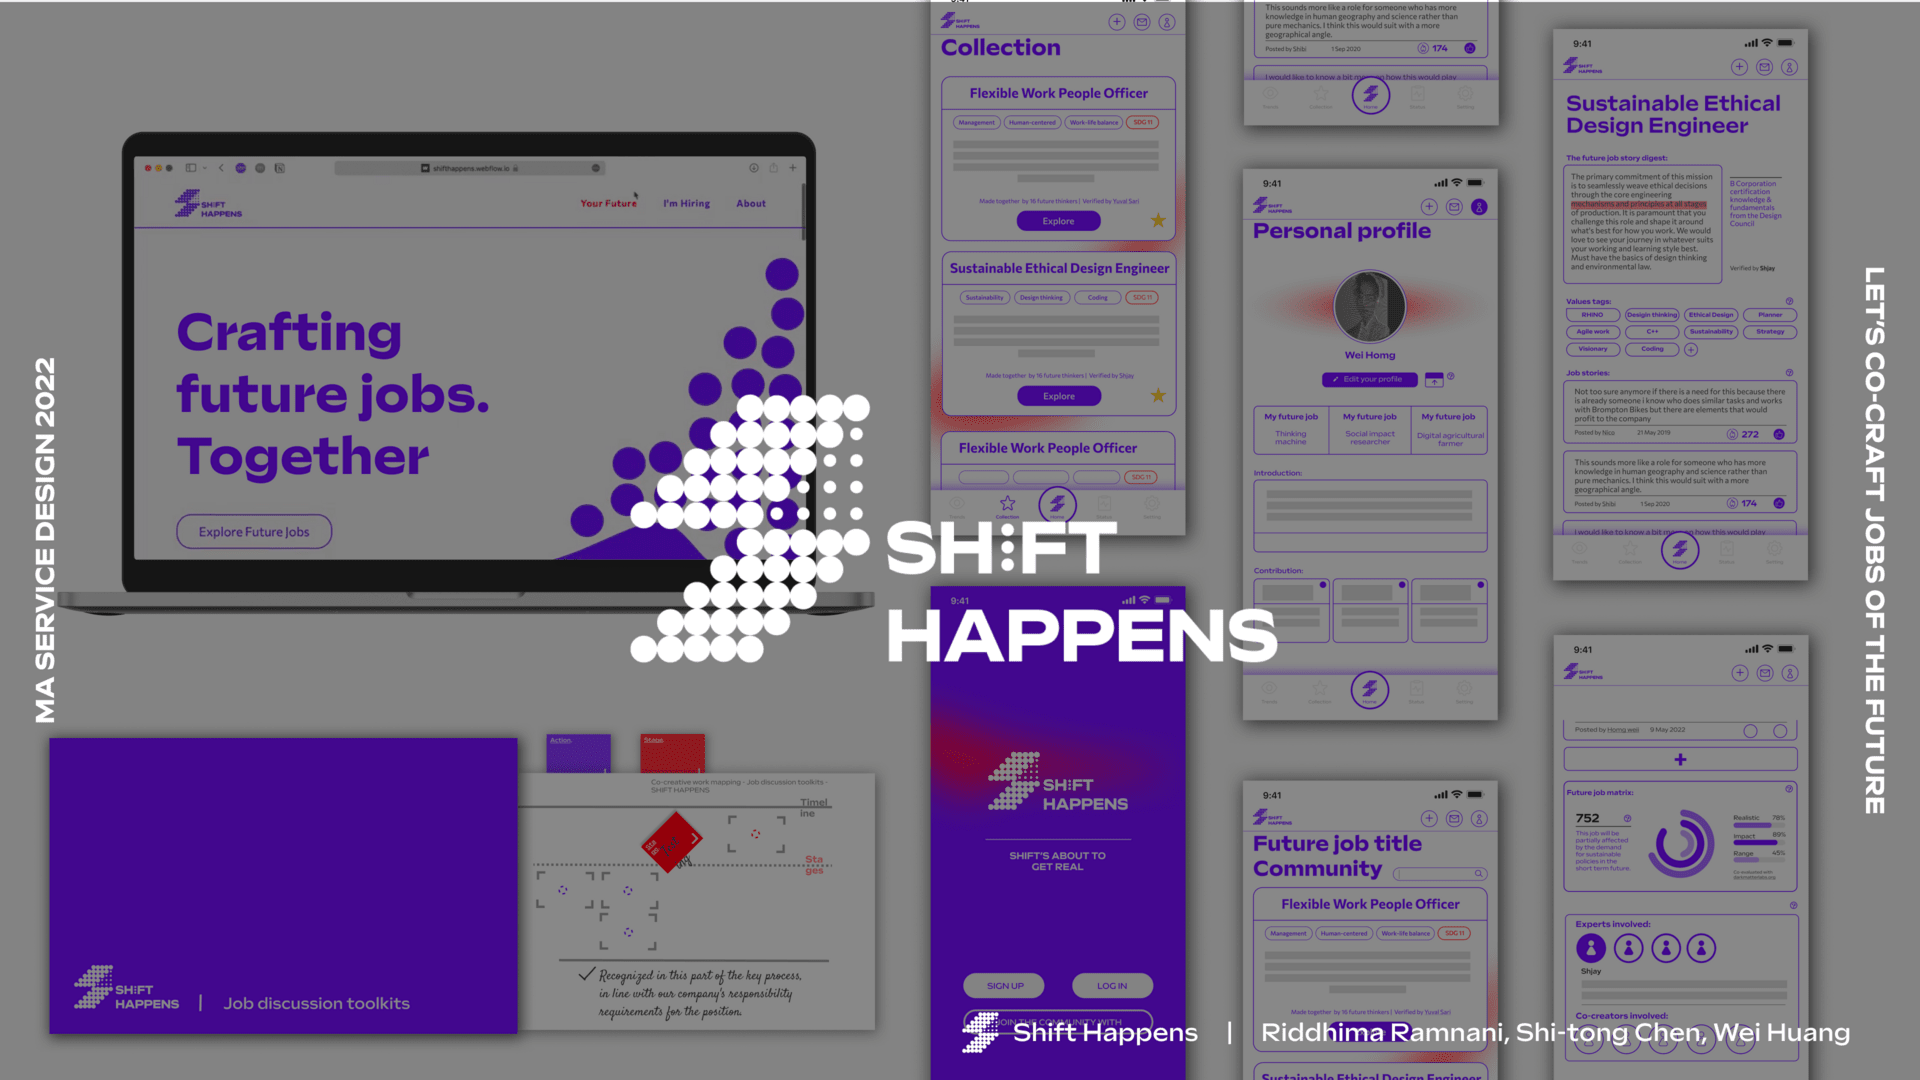 Image of a laptop screen and multiple mobile phone screens, showing various pages of a job search website with a white logo and text saying ‘Shift Happens’ over the top.